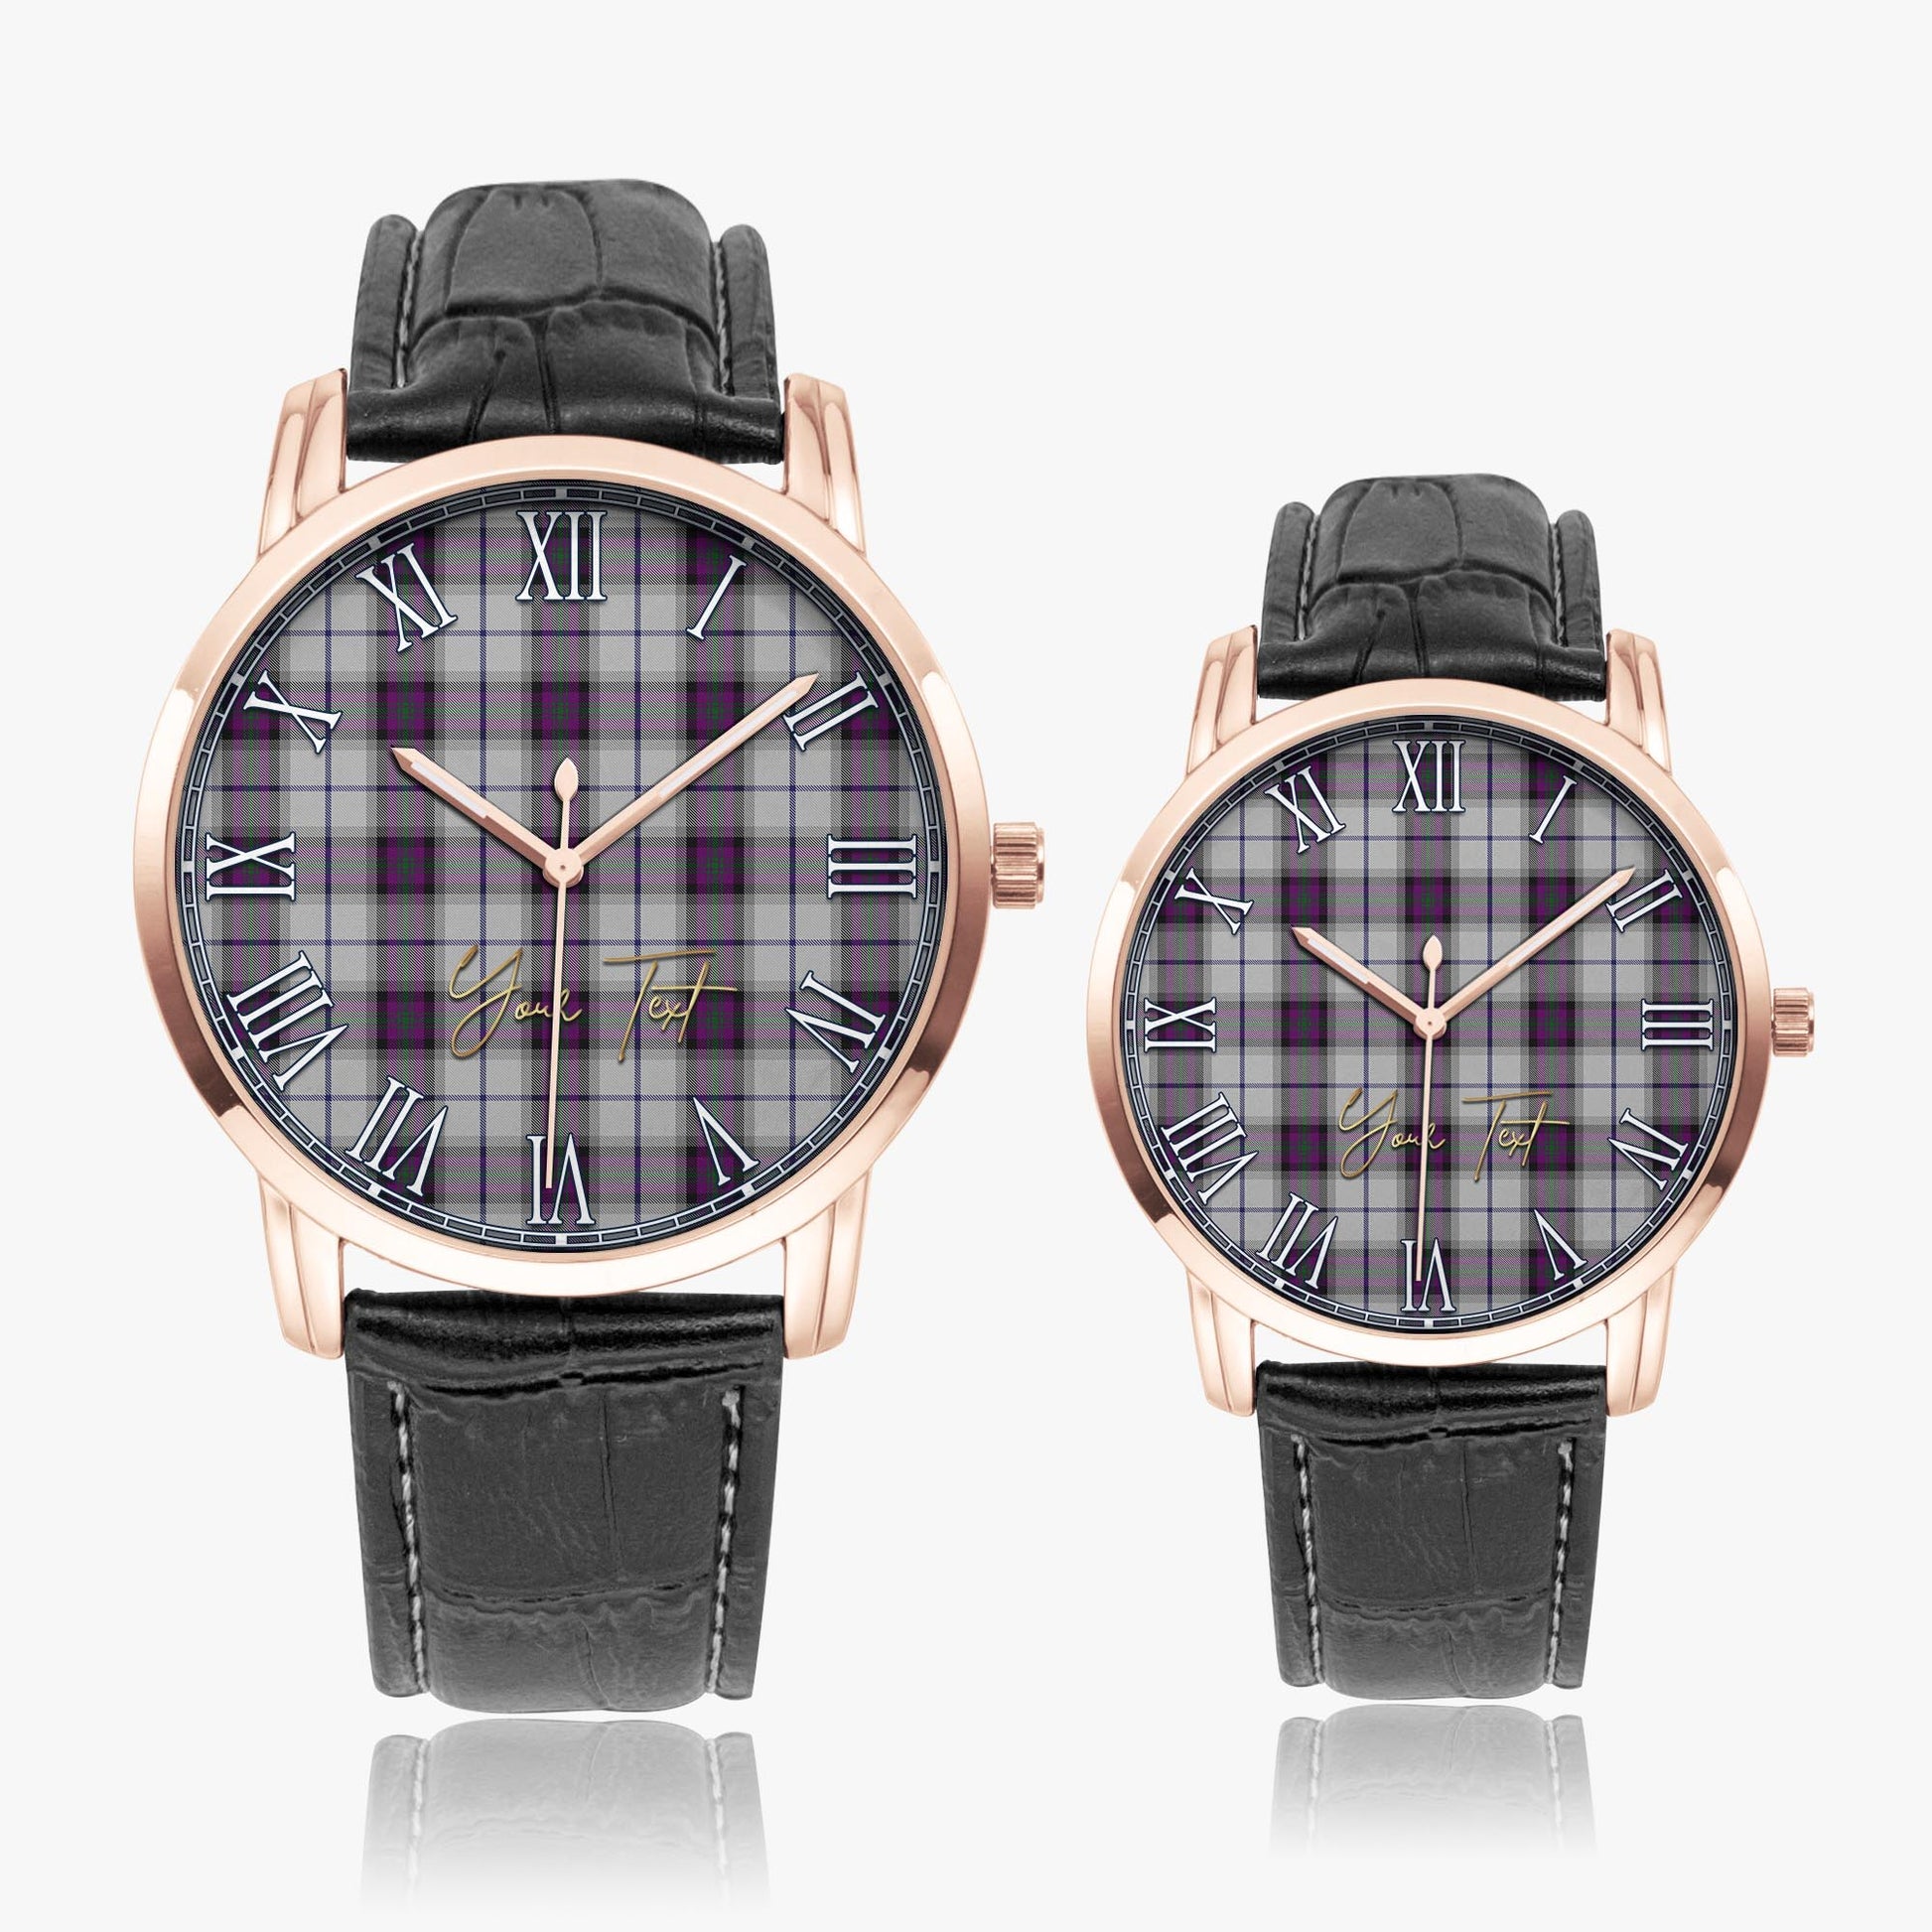 Alexander of Menstry Dress Tartan Personalized Your Text Leather Trap Quartz Watch Wide Type Rose Gold Case With Black Leather Strap - Tartanvibesclothing